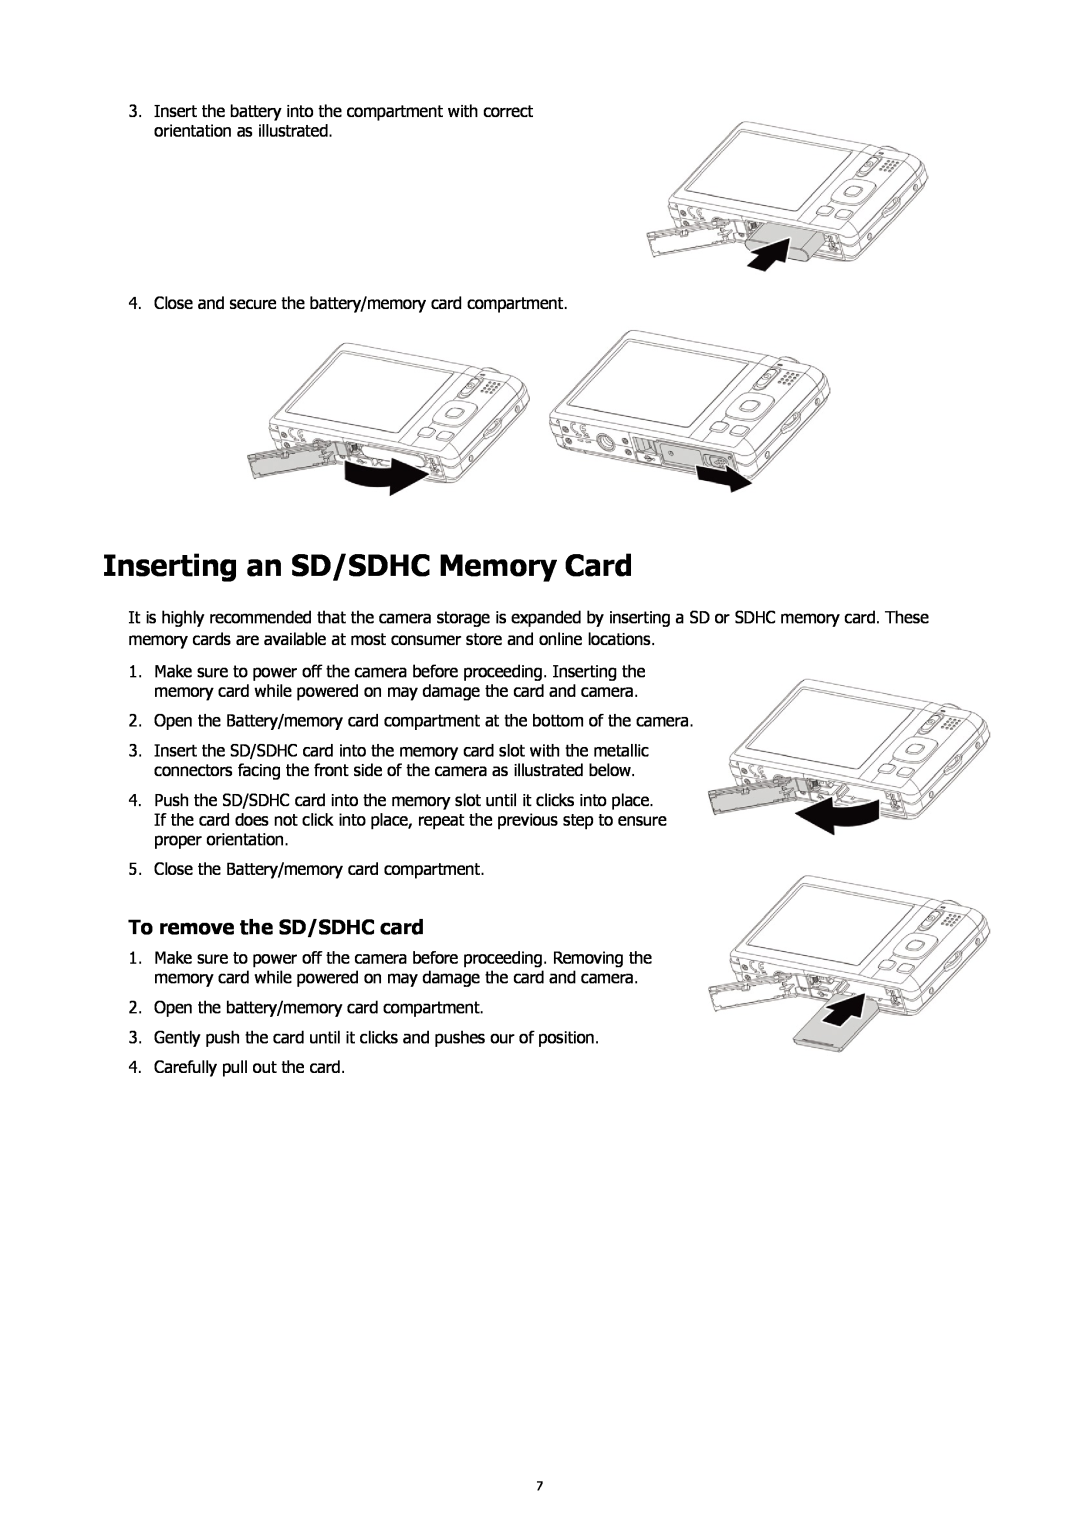 HP SW450 manual Inserting an SD/SDHC Memory Card, To remove the SD/SDHC card 